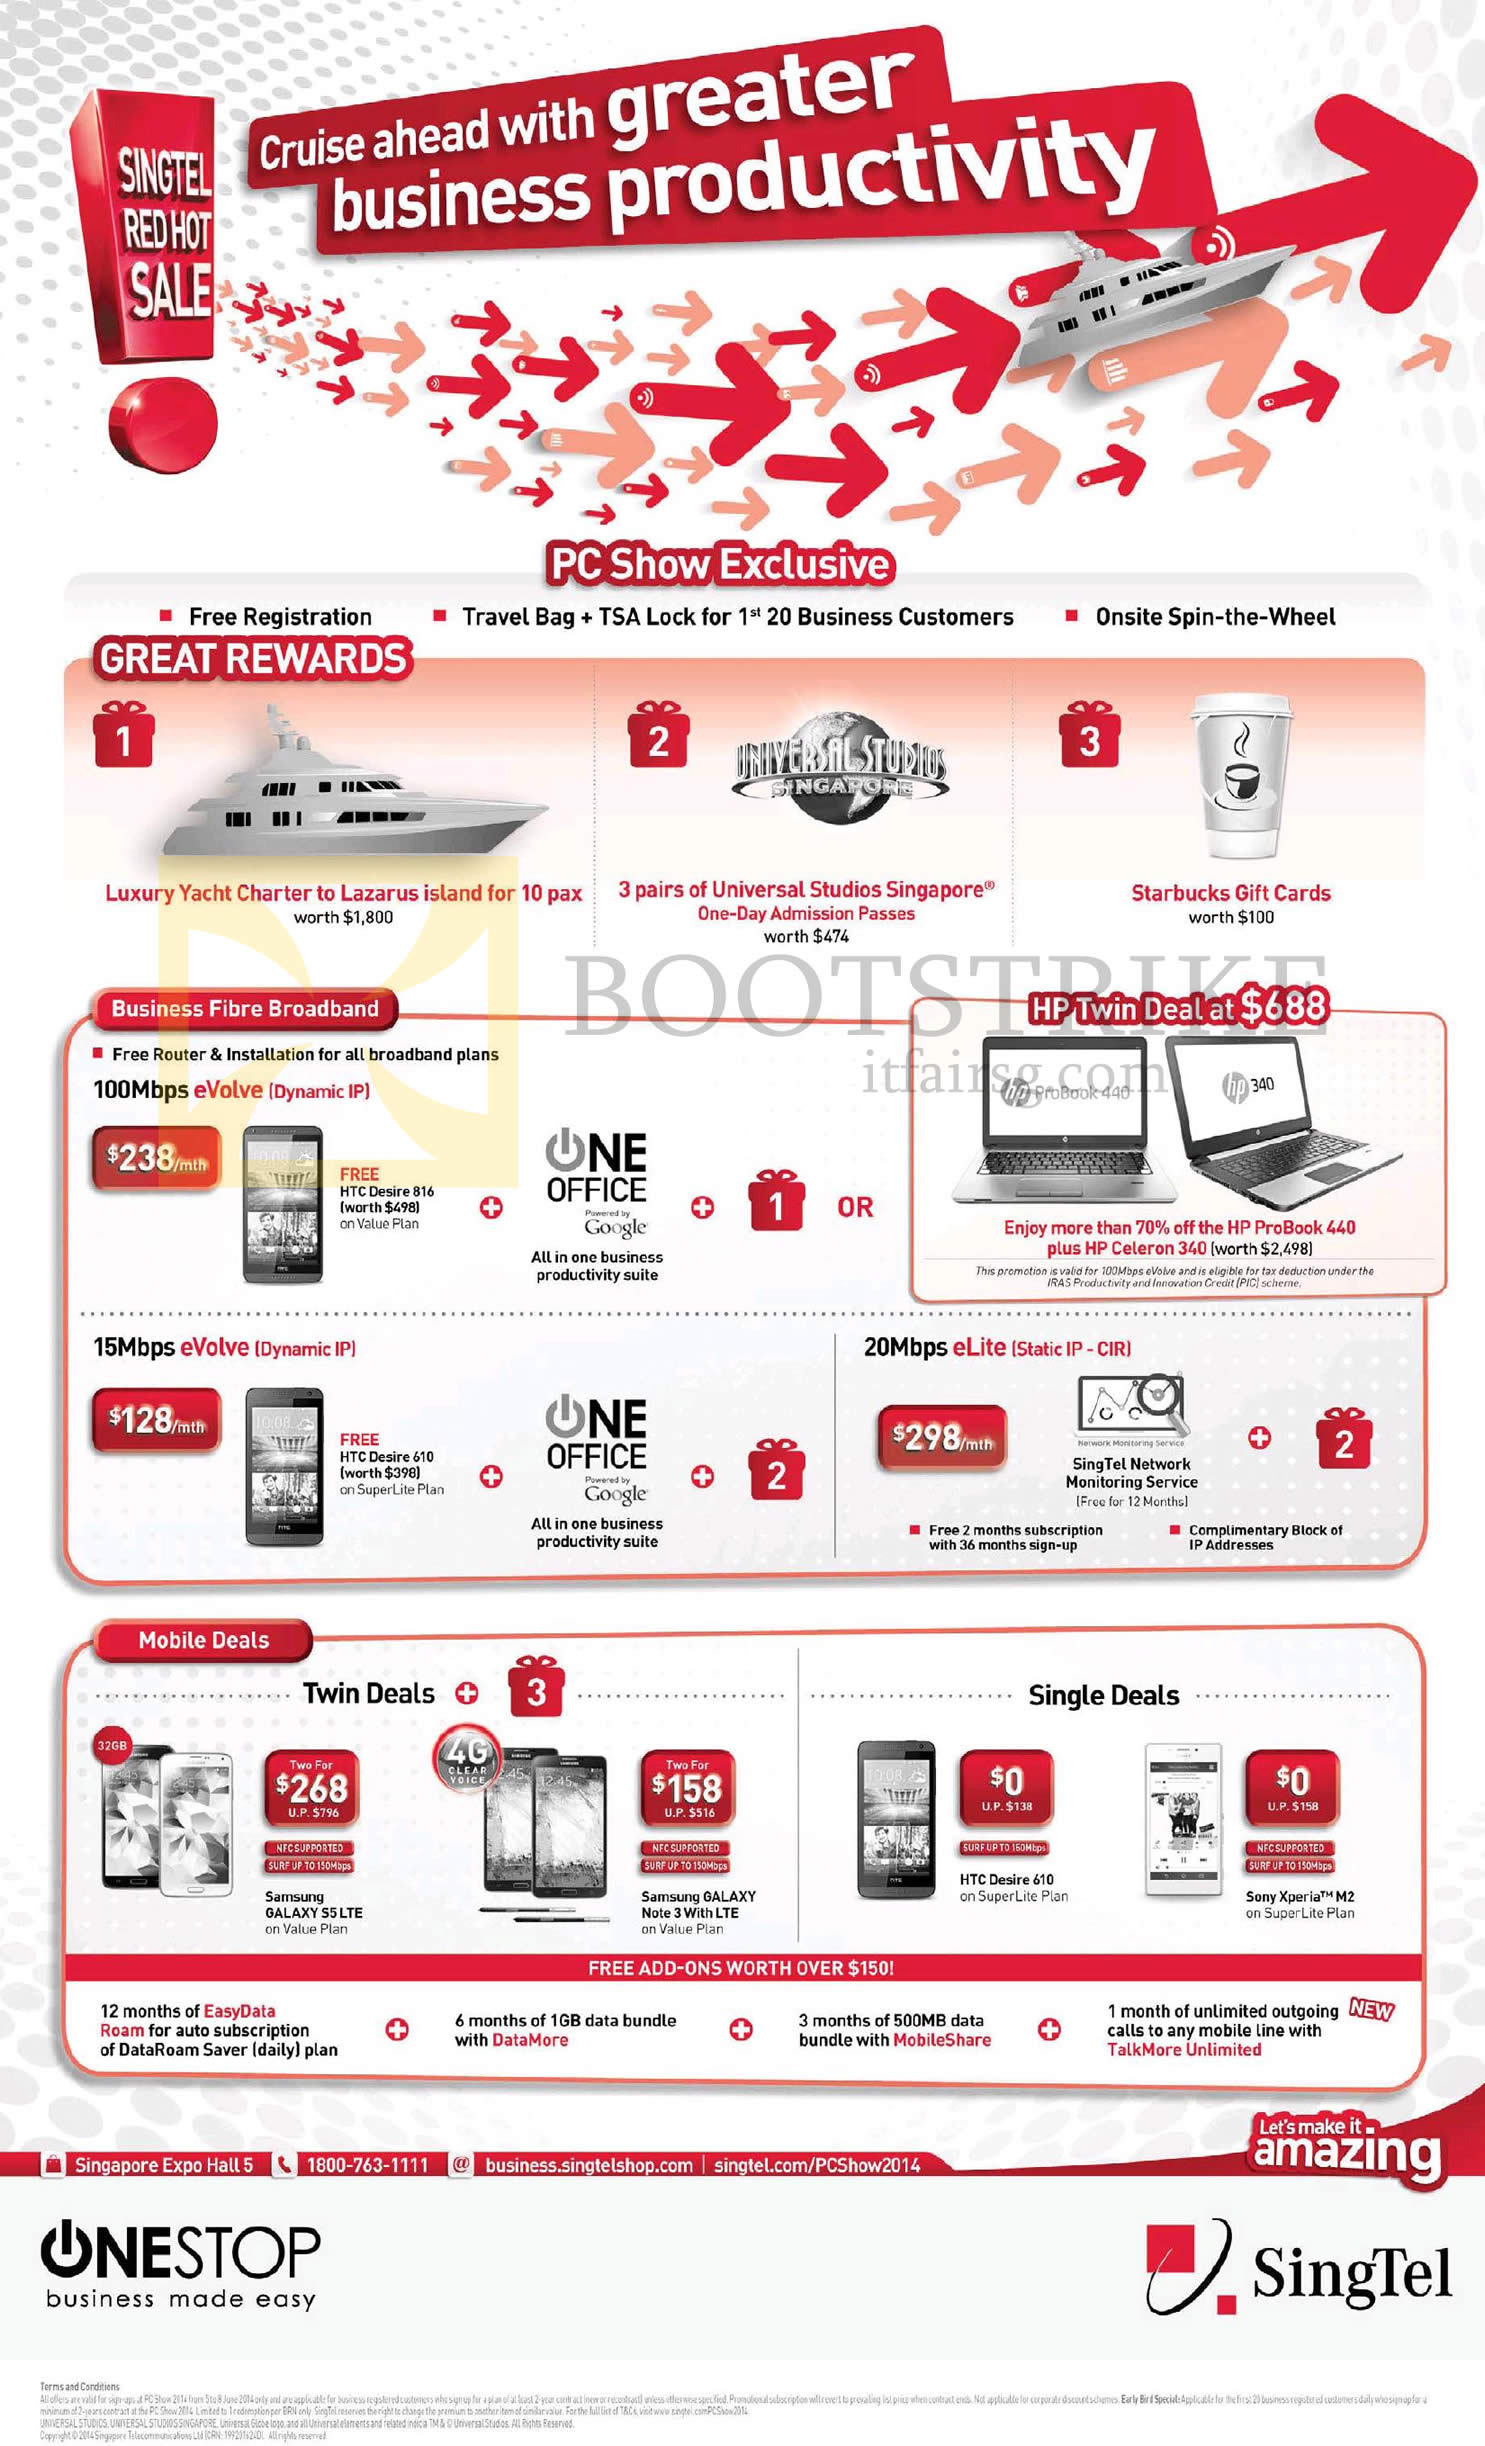 PC SHOW 2014 price list image brochure of Singtel Business Broadband Fibre, Mobile, 100Mbps EVolve 15Mbps 20Mbps, Samsung Galaxy S5, Note 3, HTC Desire 610, Sony Xperia M2